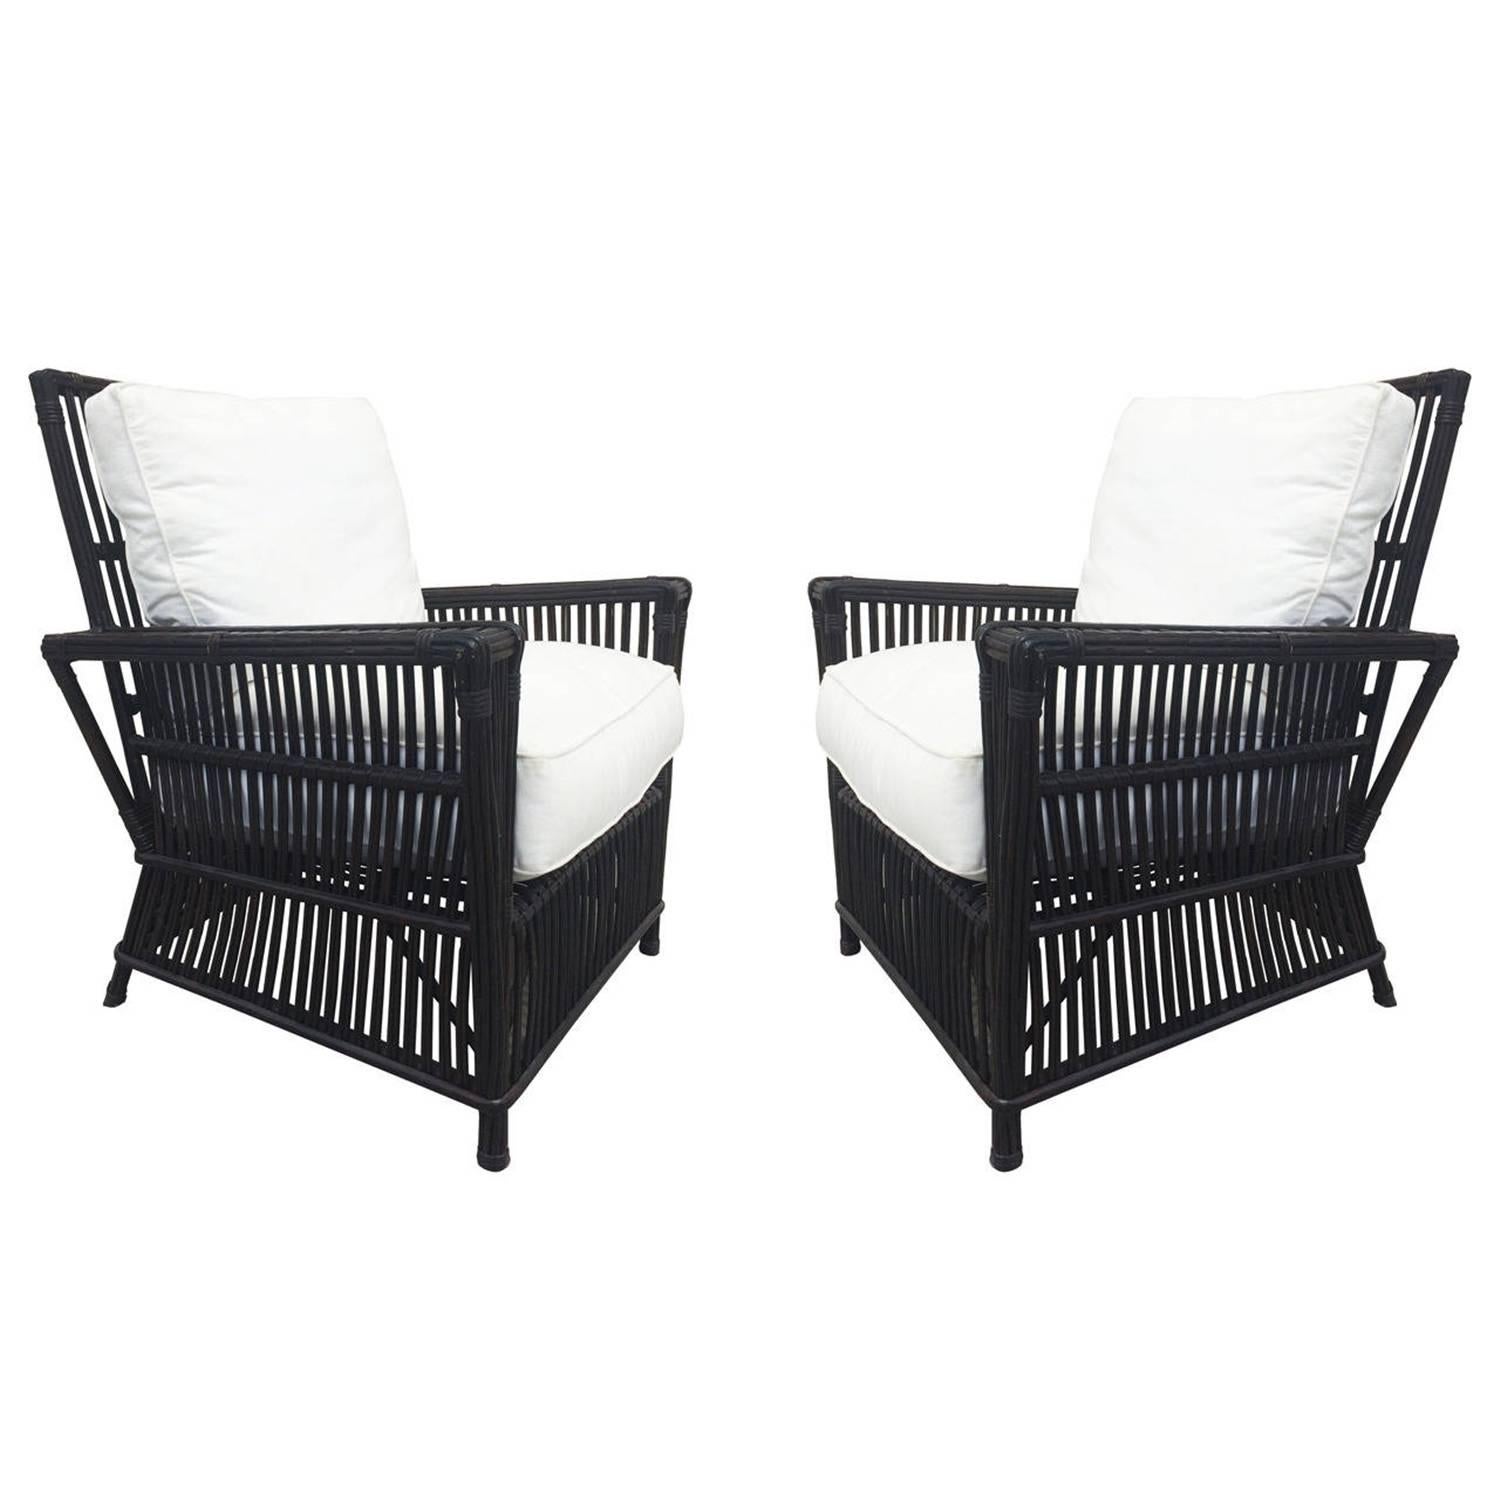 Wicker or Bamboo Patio Chairs and Ottomans Upholstered in White Canvas